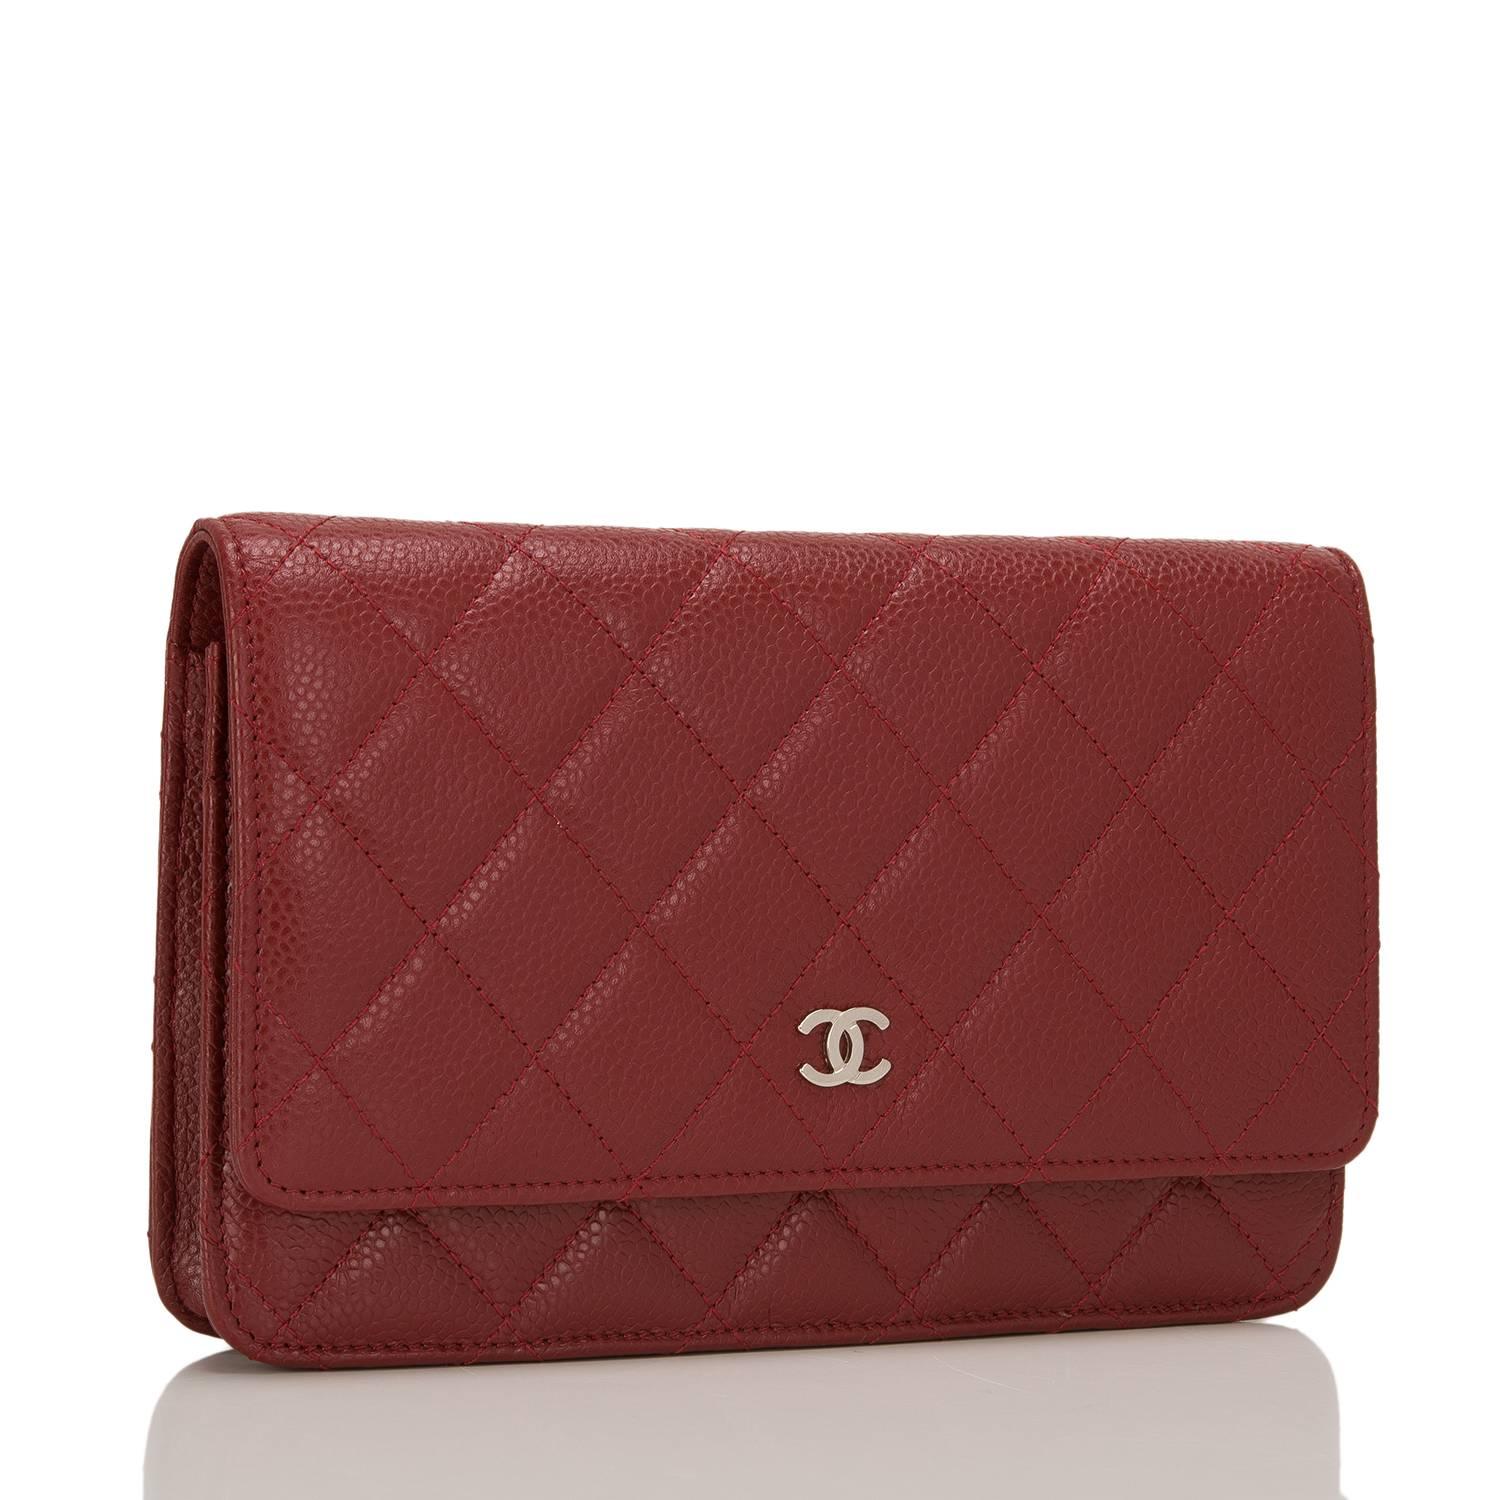 This timeless Wallet on Chain (WOC) in dark red caviar leather with silver tone hardware features signature Chanel quilting, front flap with CC charm and hidden snap closure, expandable sides and bottom, half moon rear pocket and interwoven silver